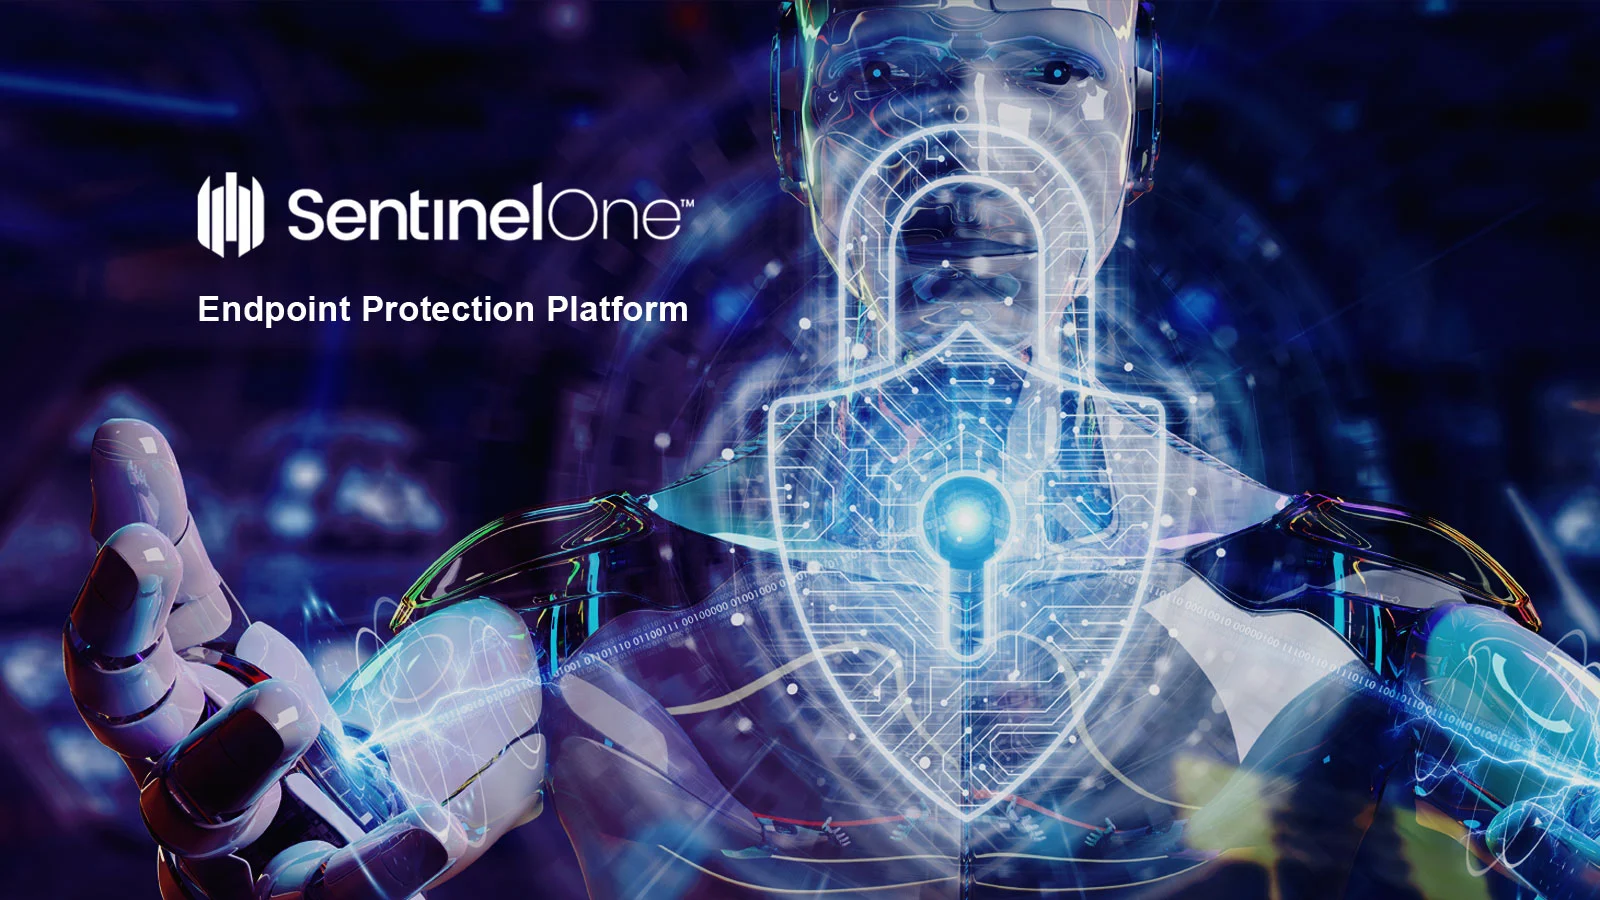 sentinelone endpoint protection